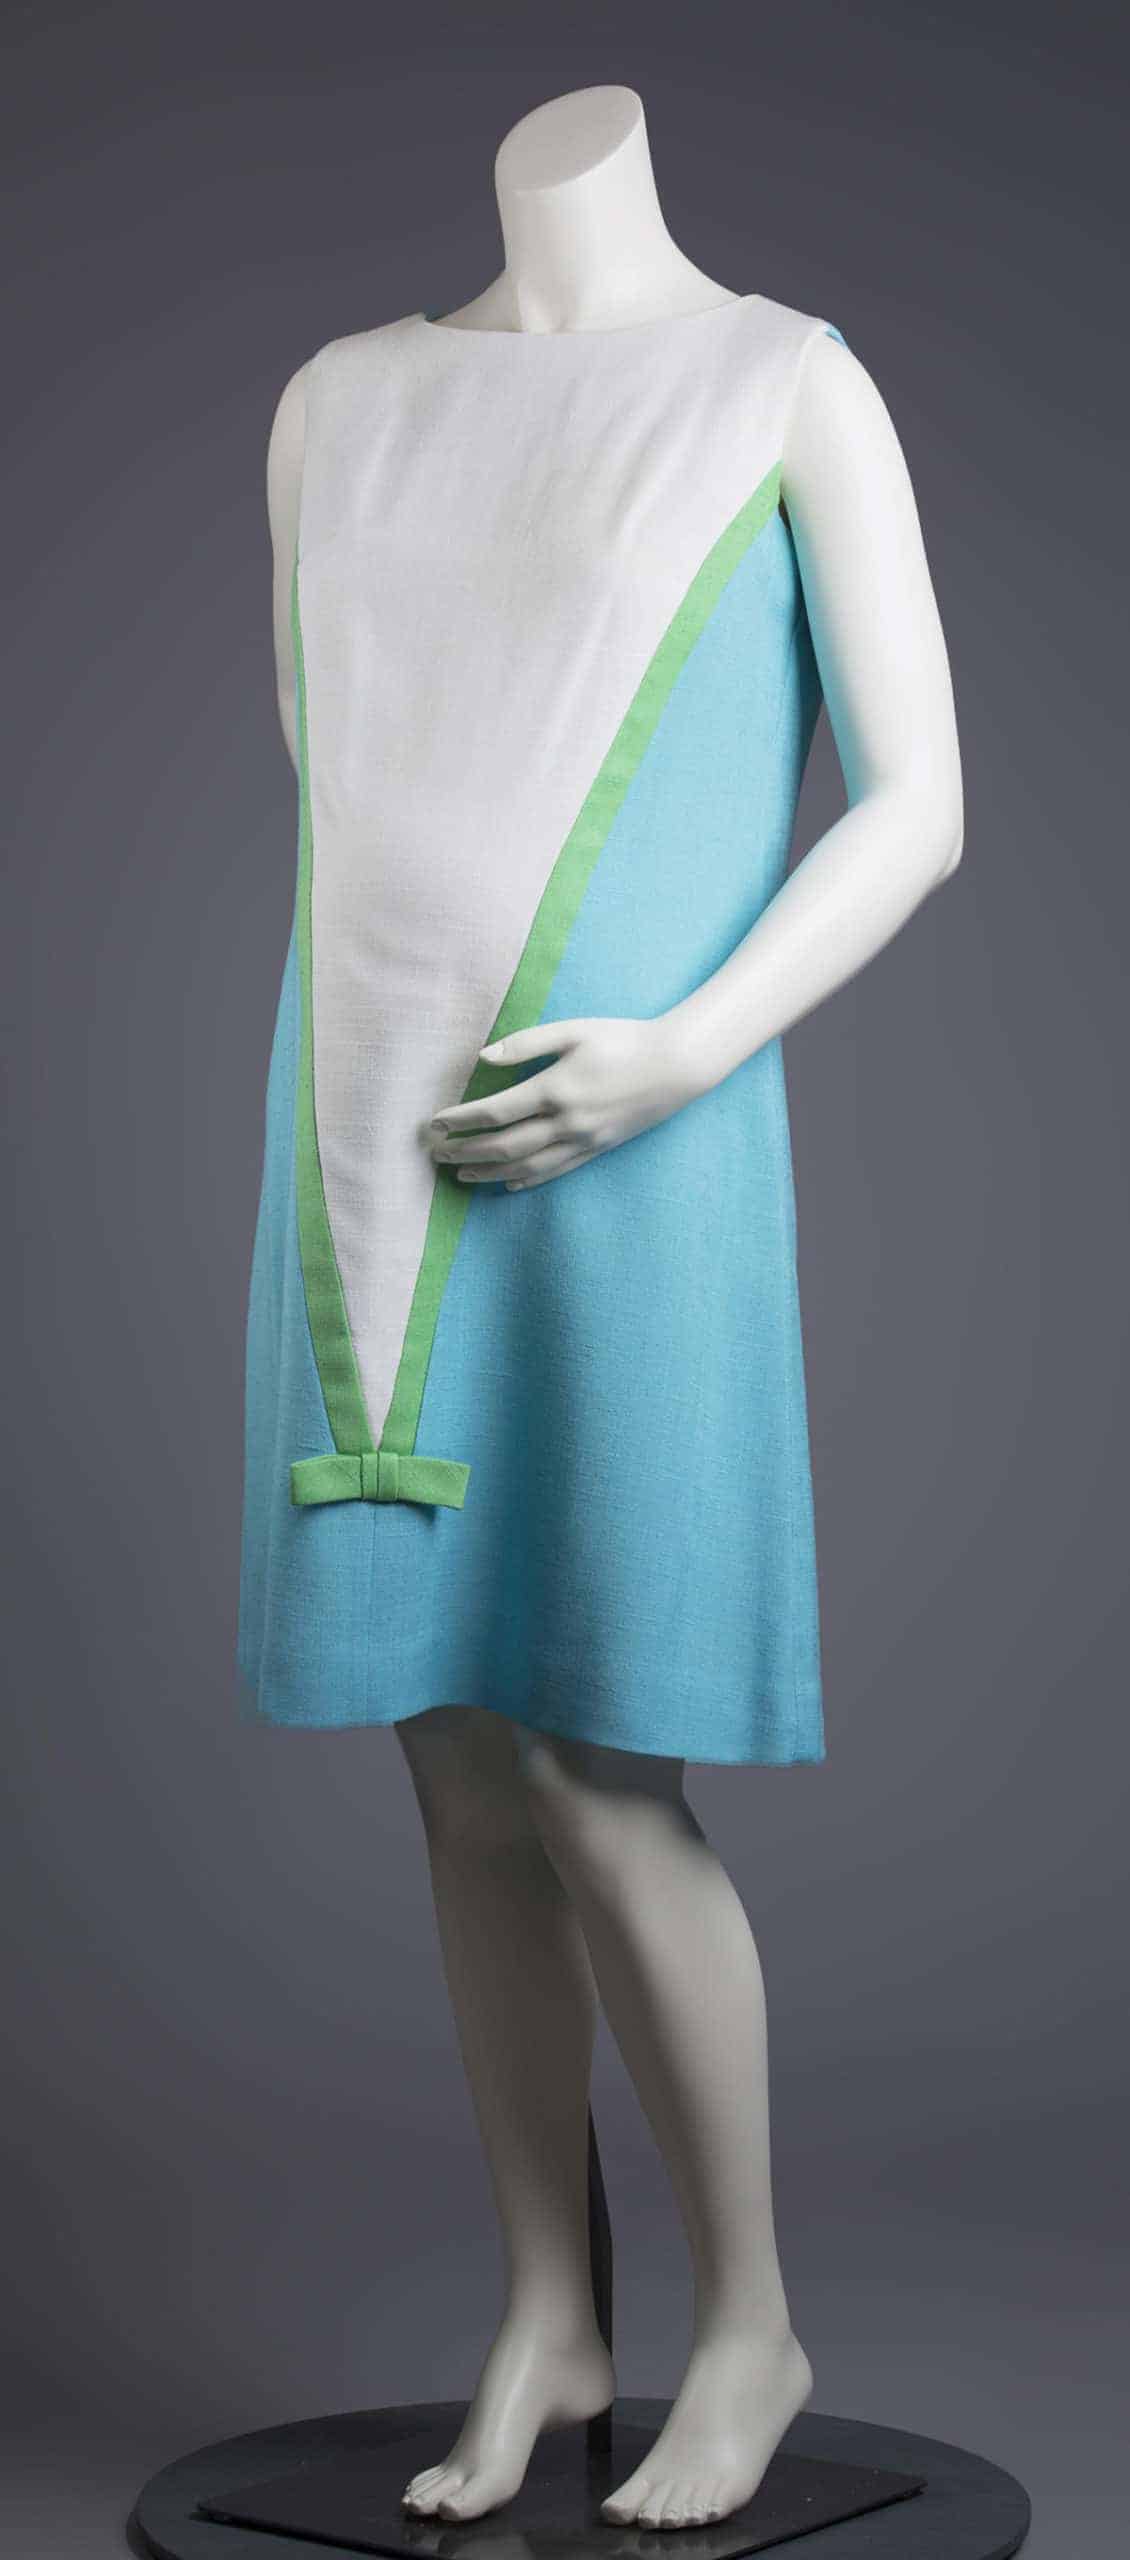 Page Boy maternity dress. 1960s. Courtesy of UNT